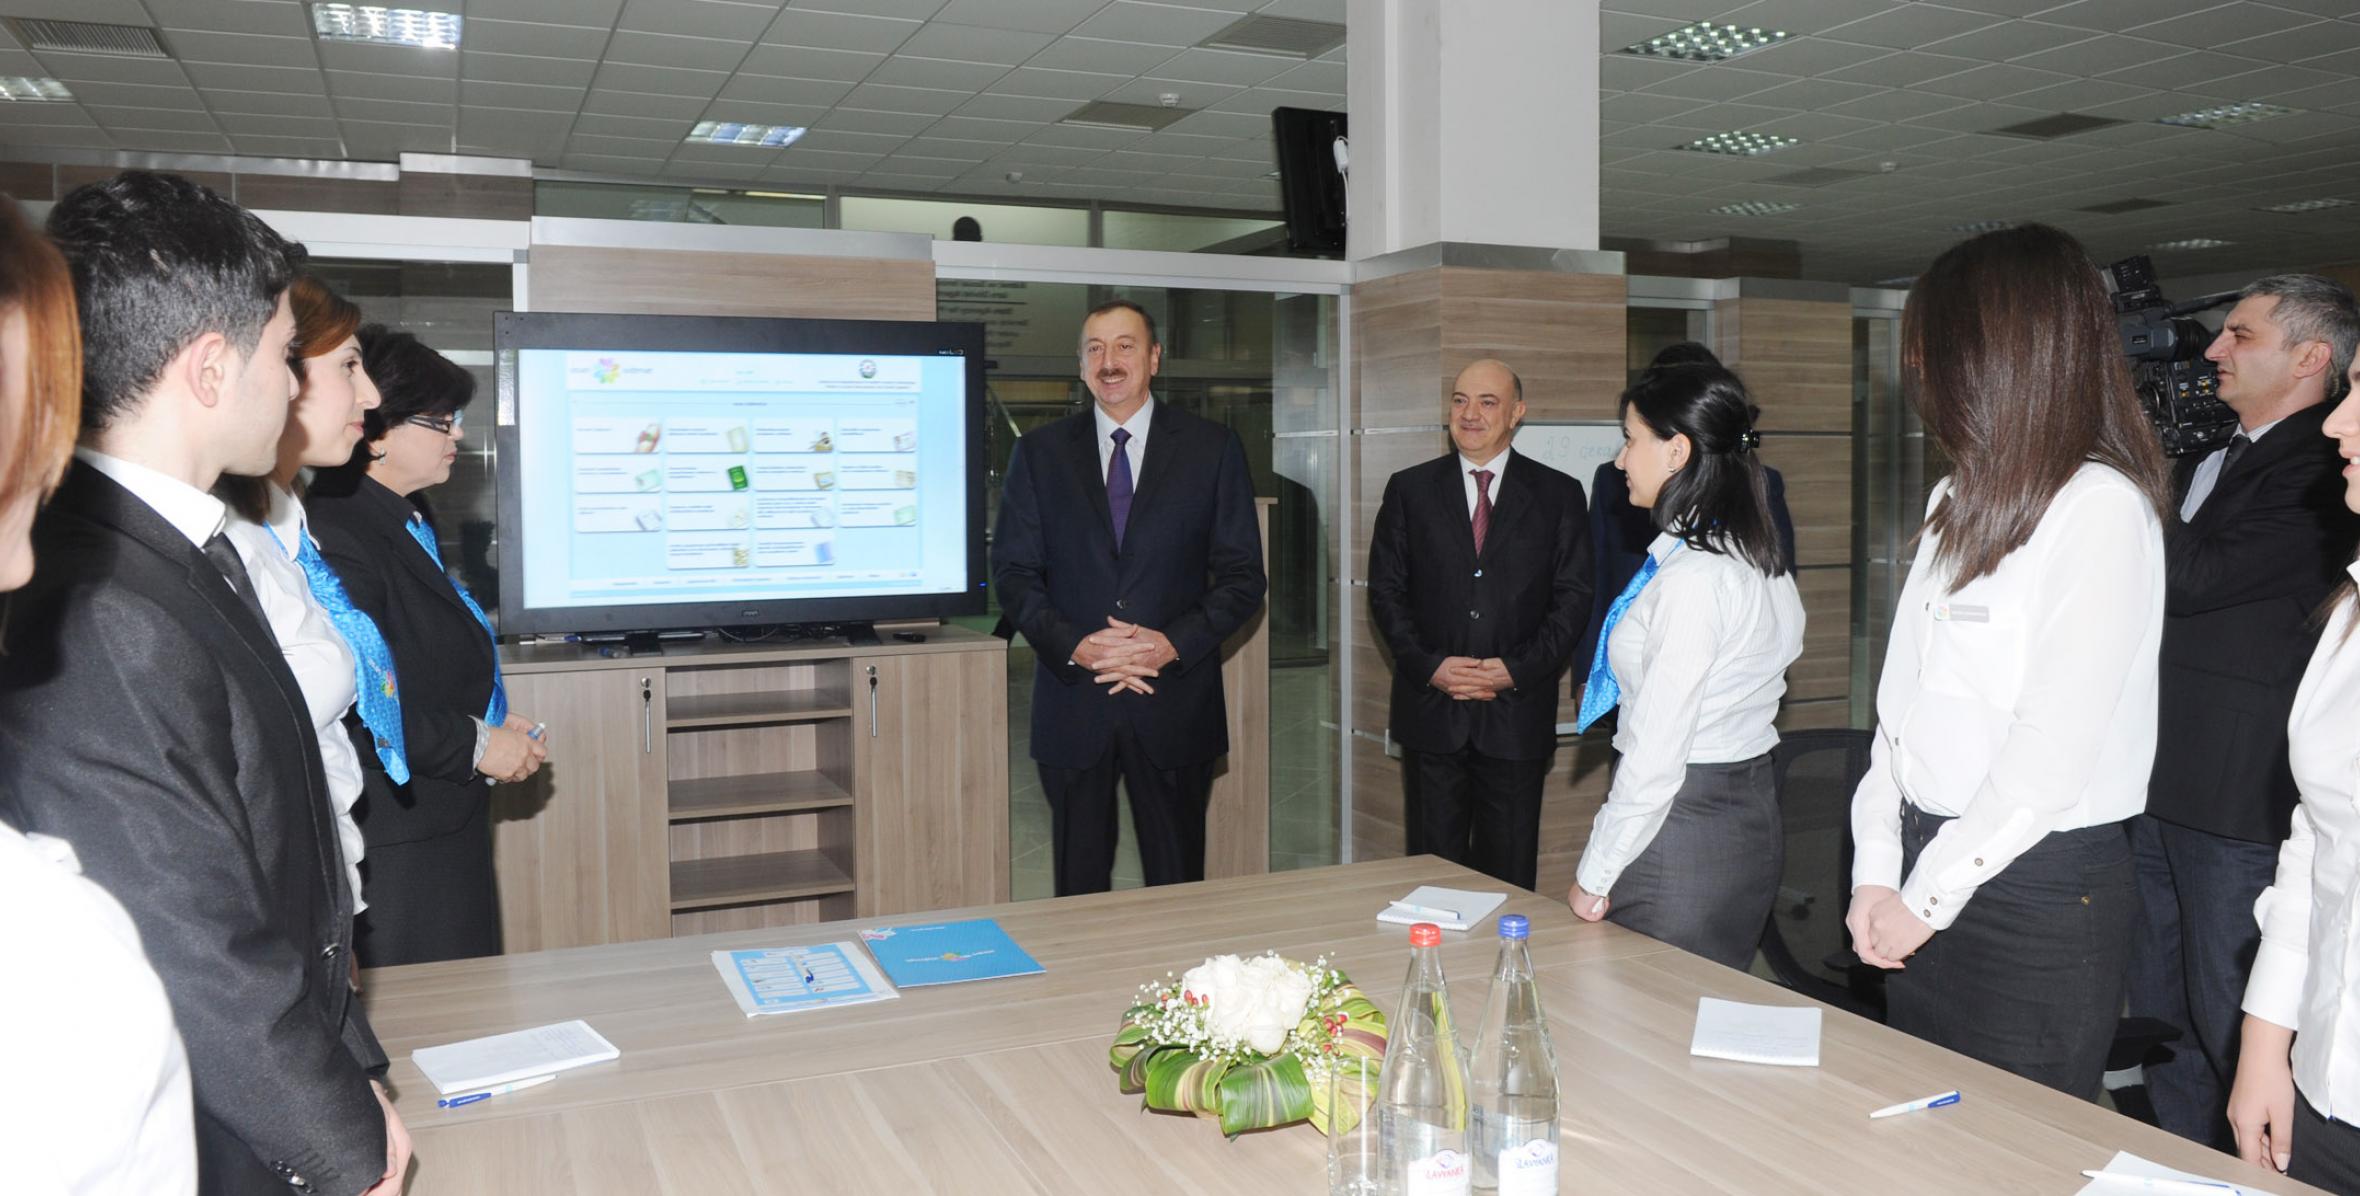 Ilham Aliyev attended the opening of “ASAN Xidmət” Center No 1 of the State Agency for Public Services and Social Innovation